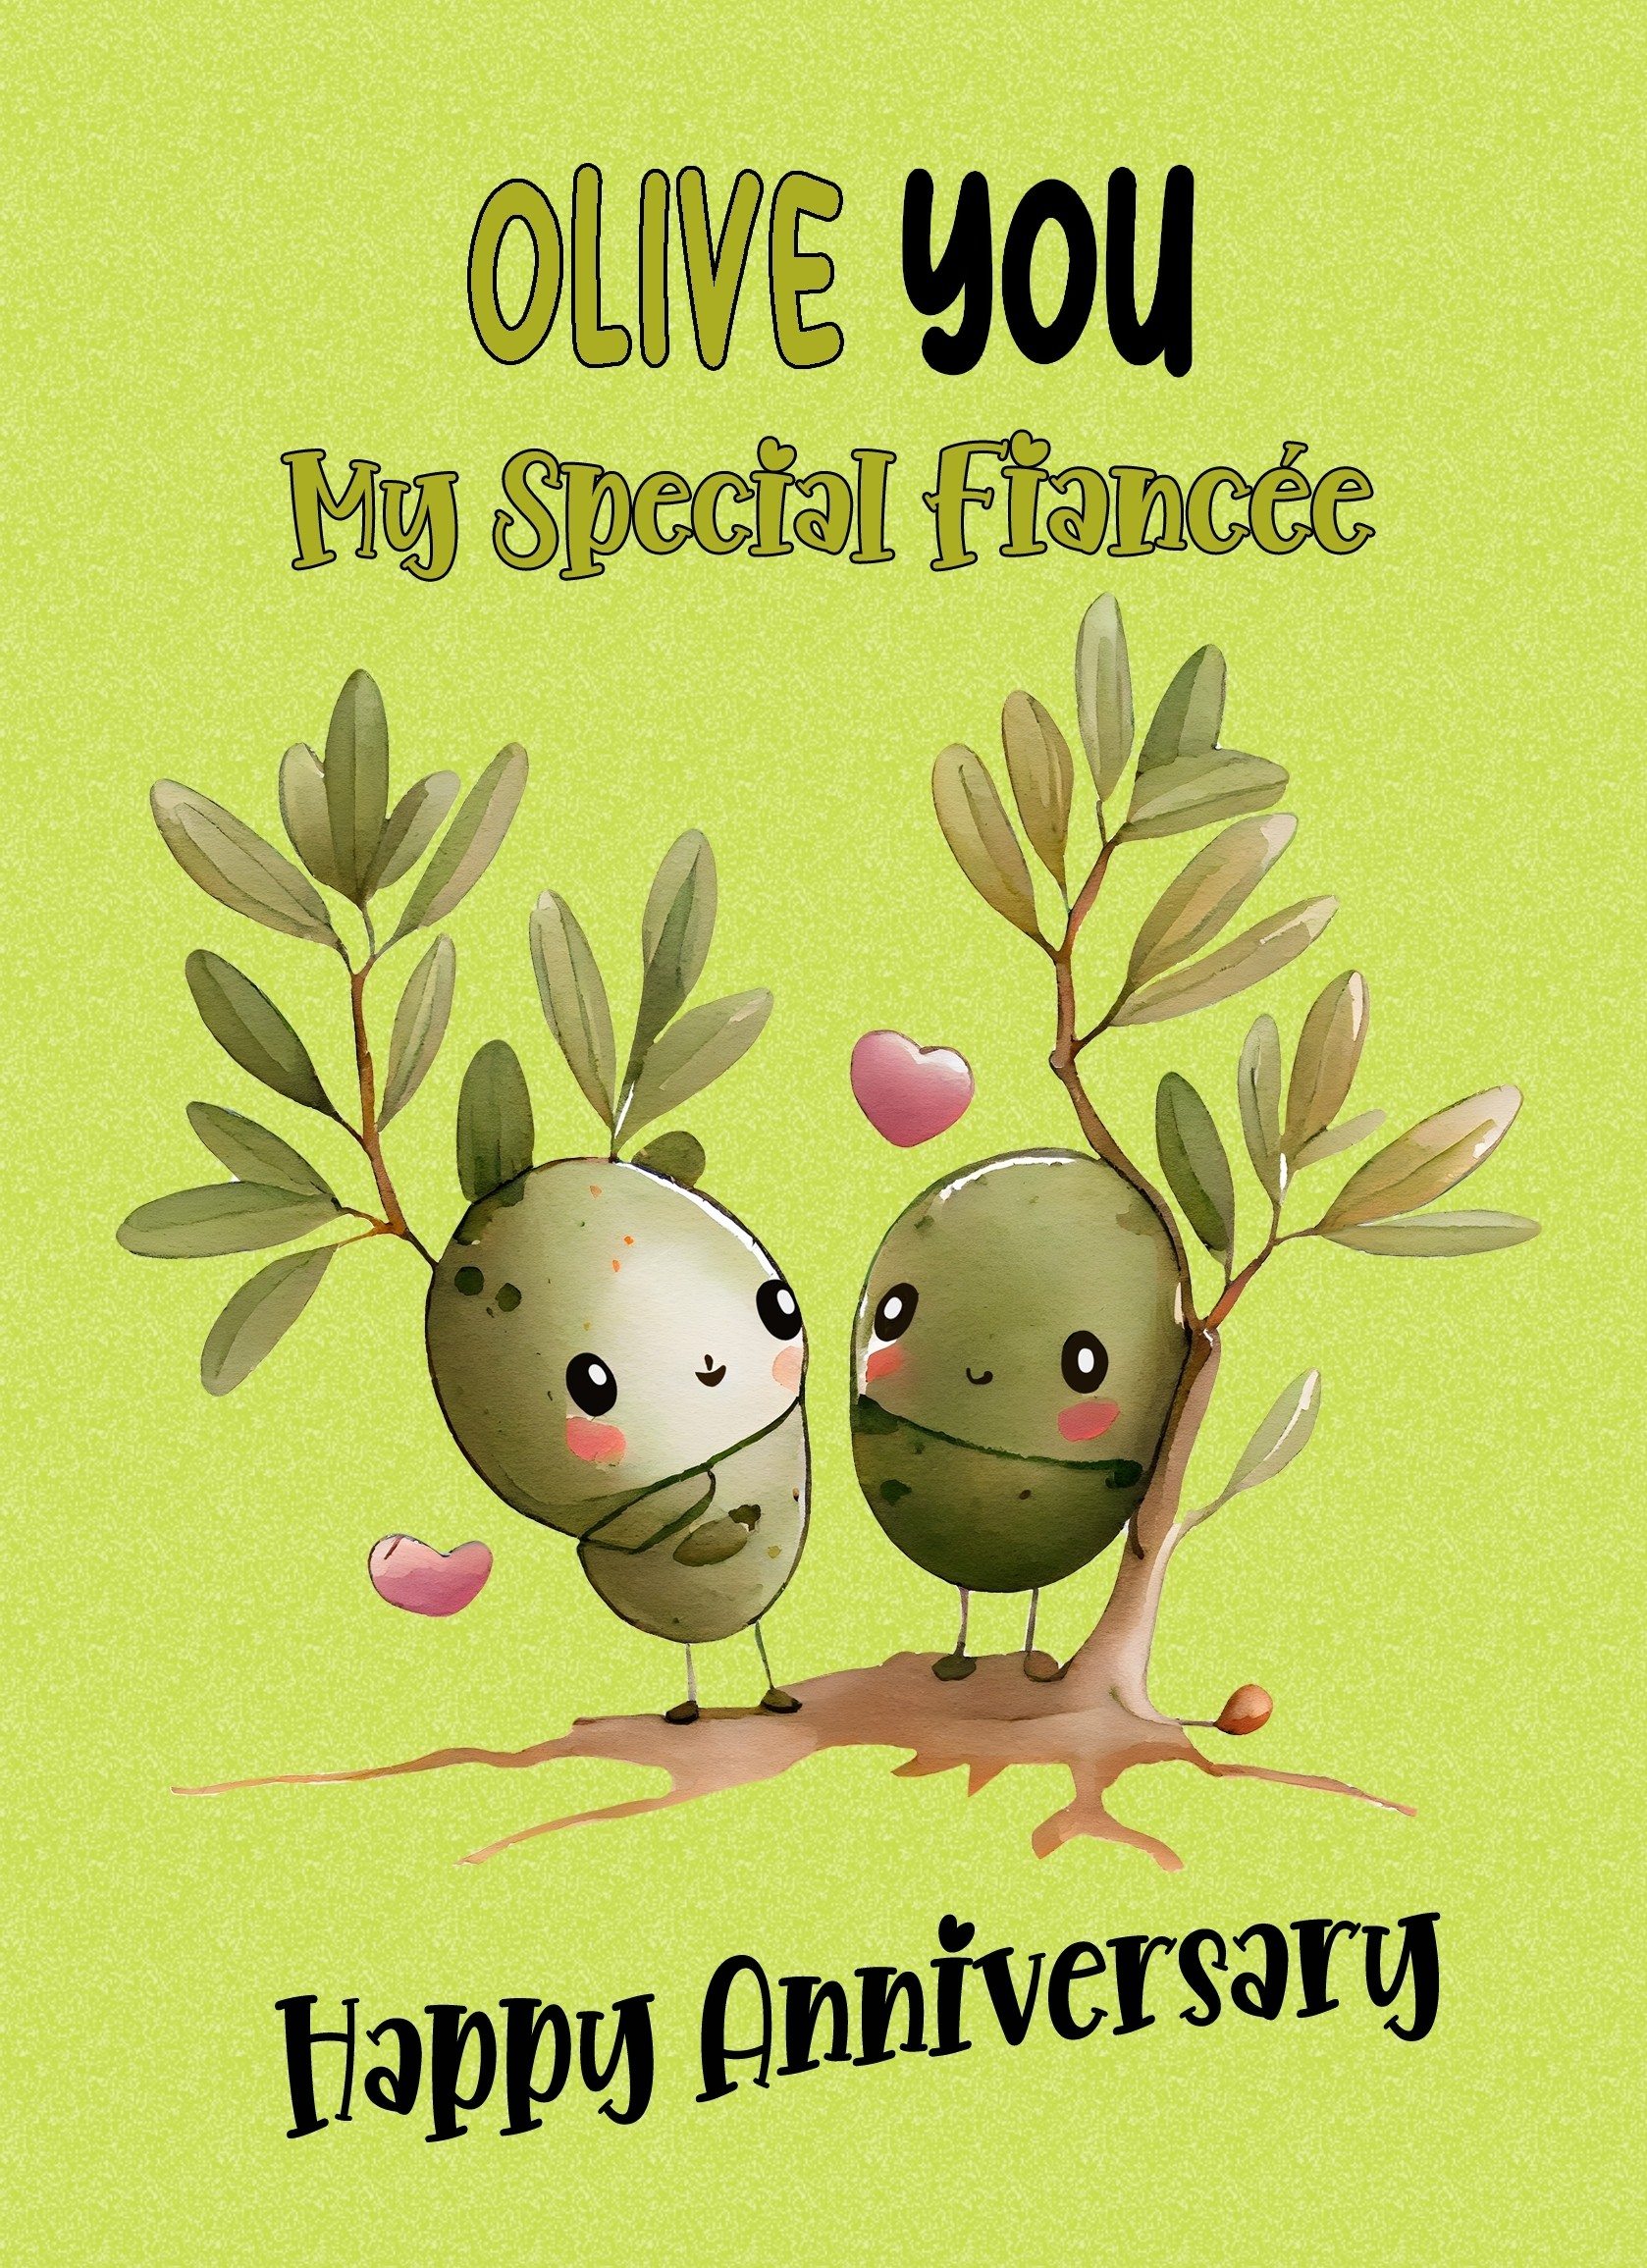 Funny Pun Romantic Anniversary Card for Fiancee (Olive You)